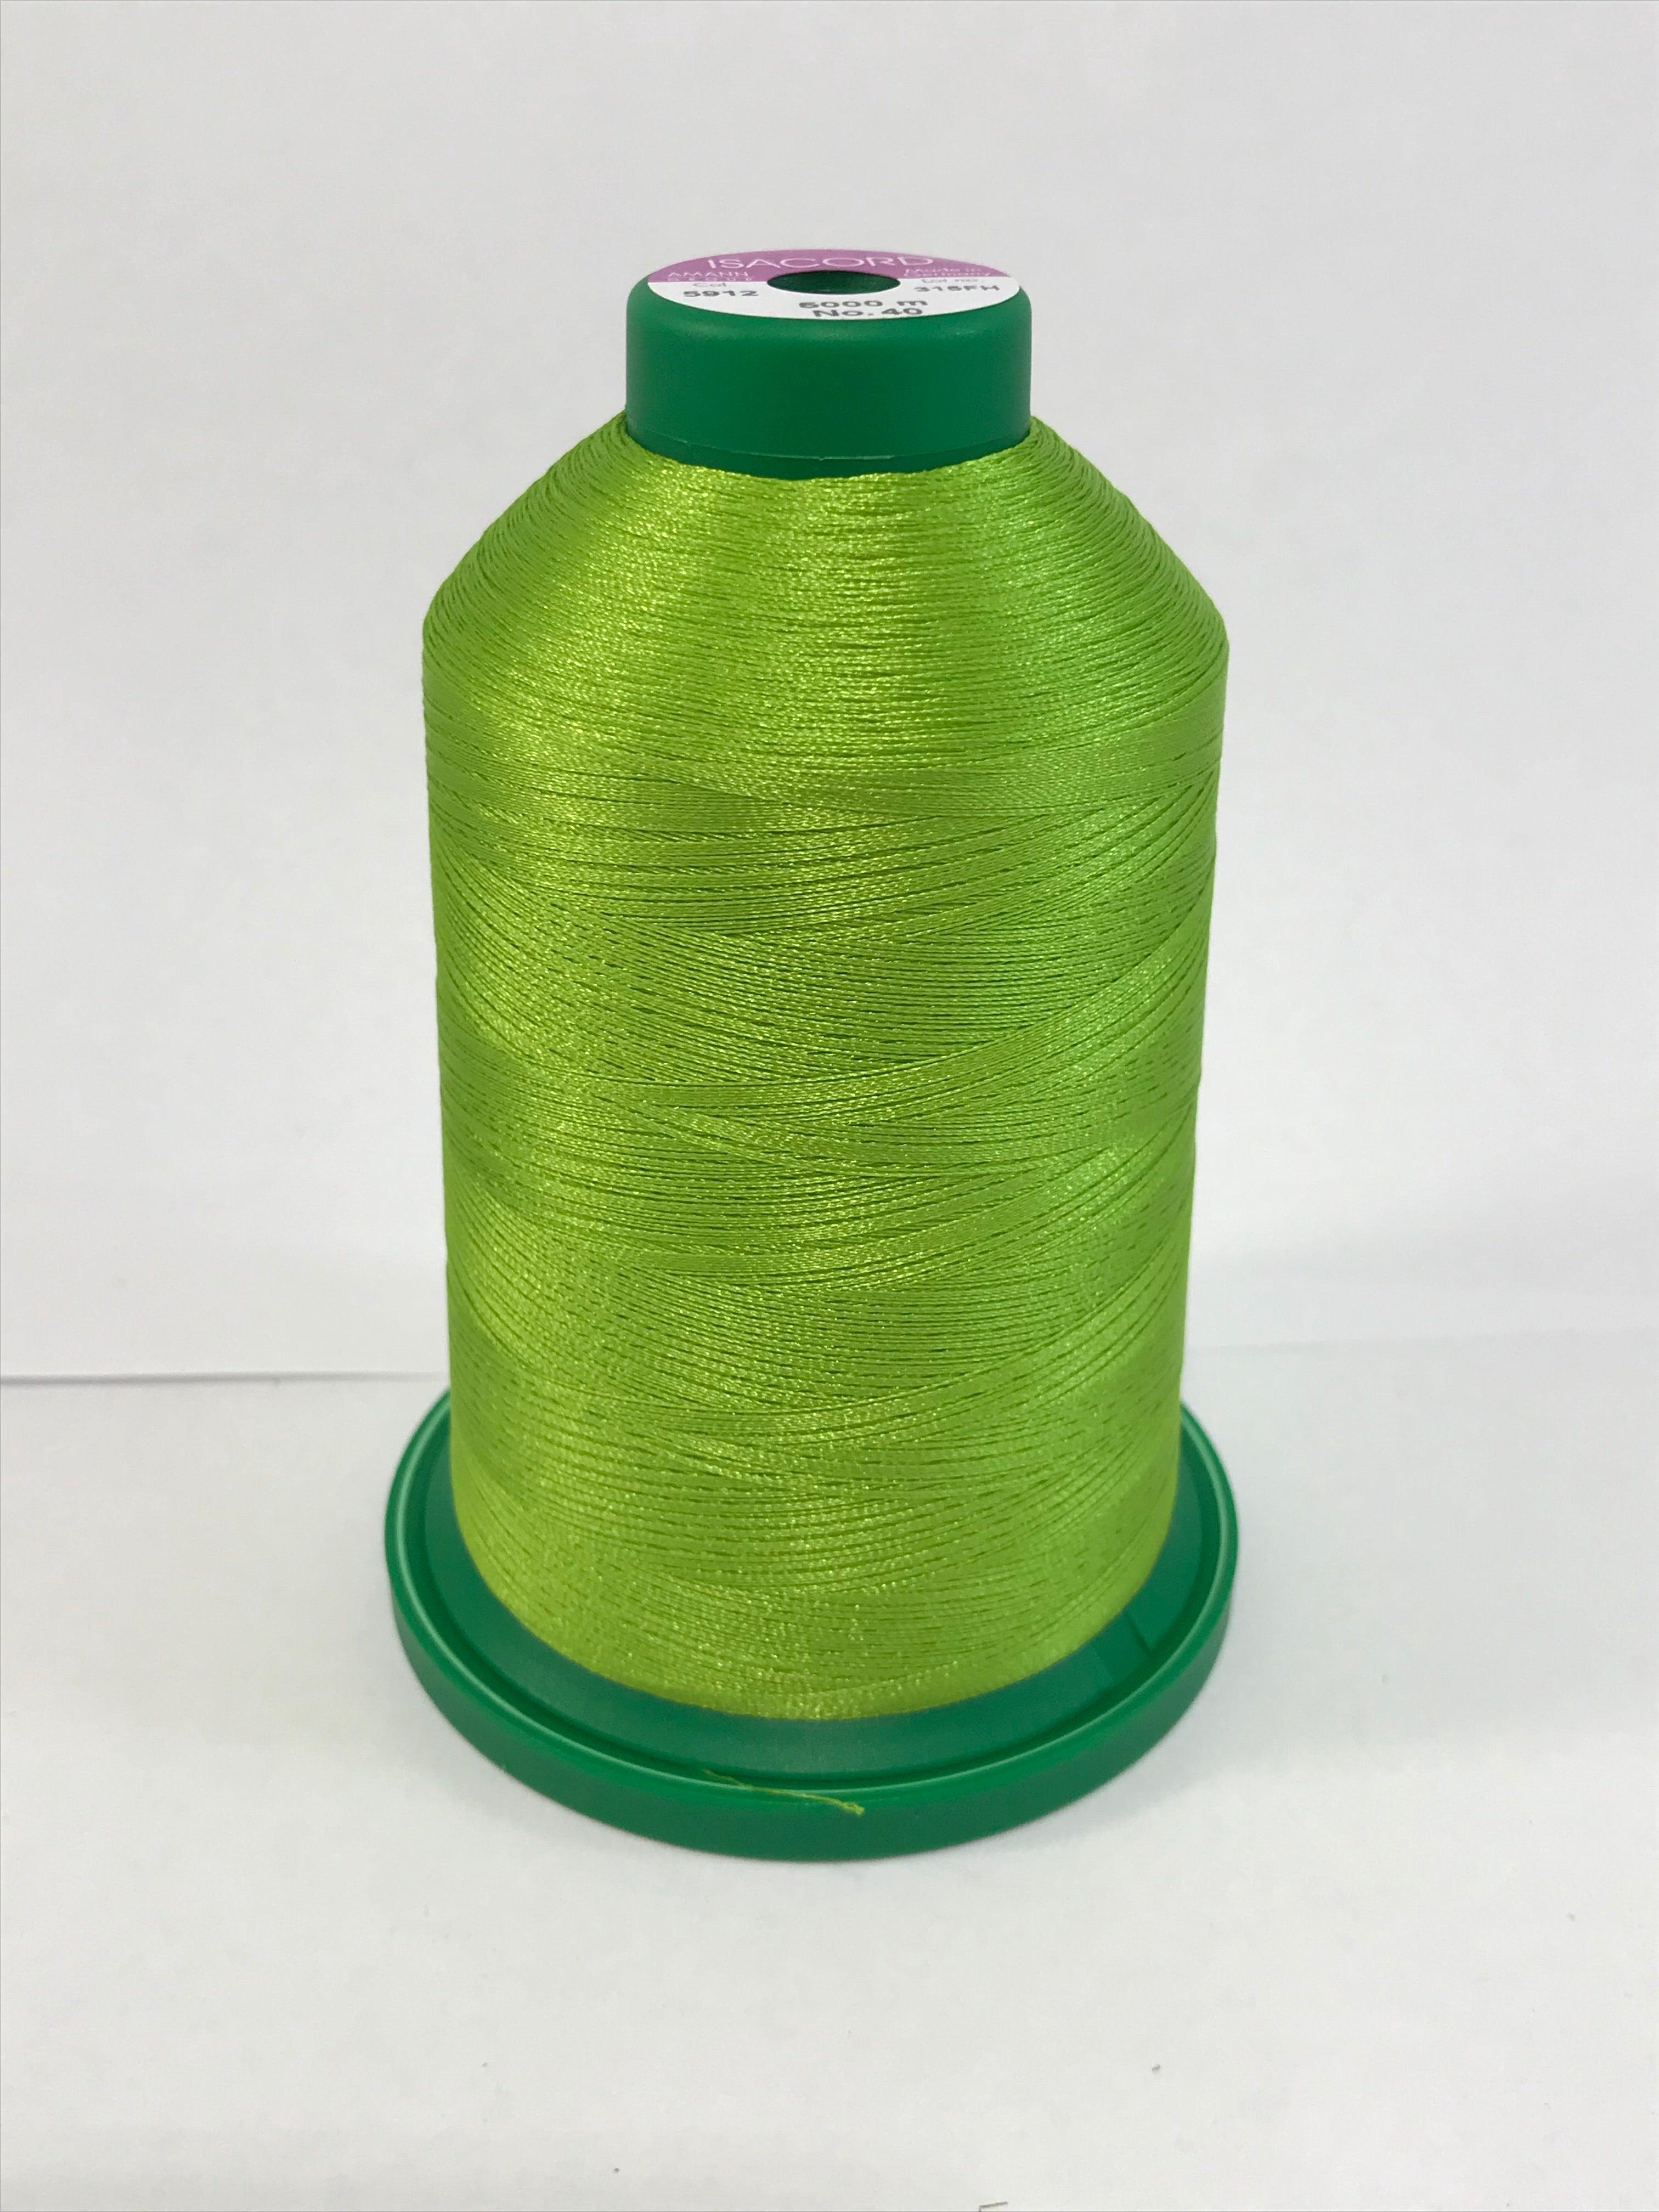 5912 - ERIN GREEN - ISACORD EMBROIDERY THREAD 40 WT